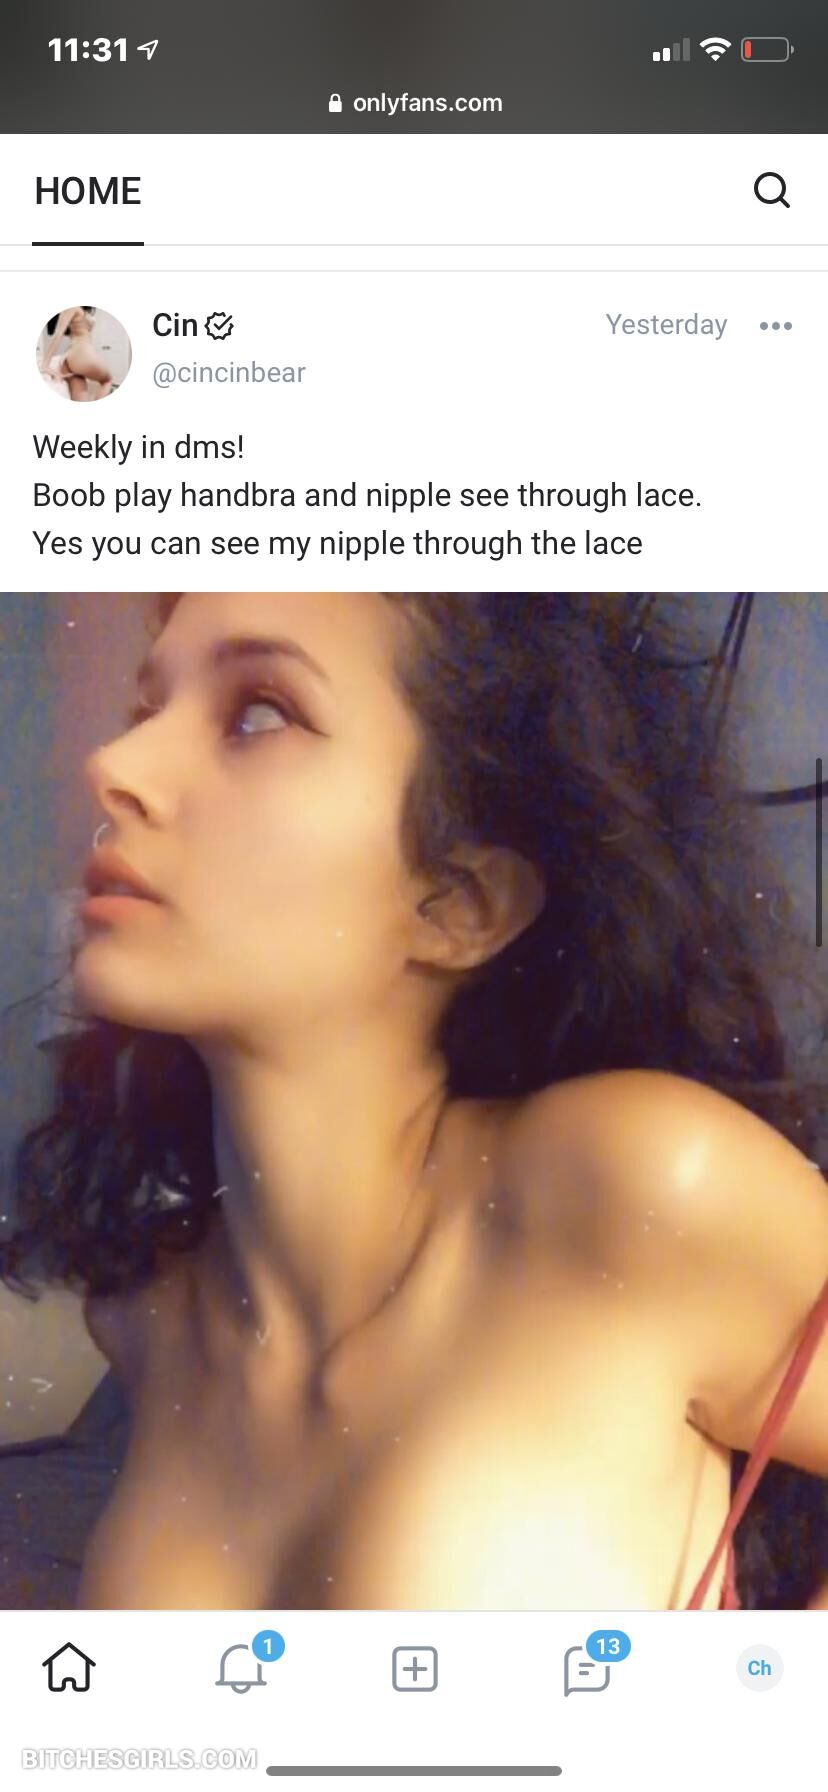 Cincinbear Nudes - Twitch Streamer Onlyfans Anal Leaked Photos